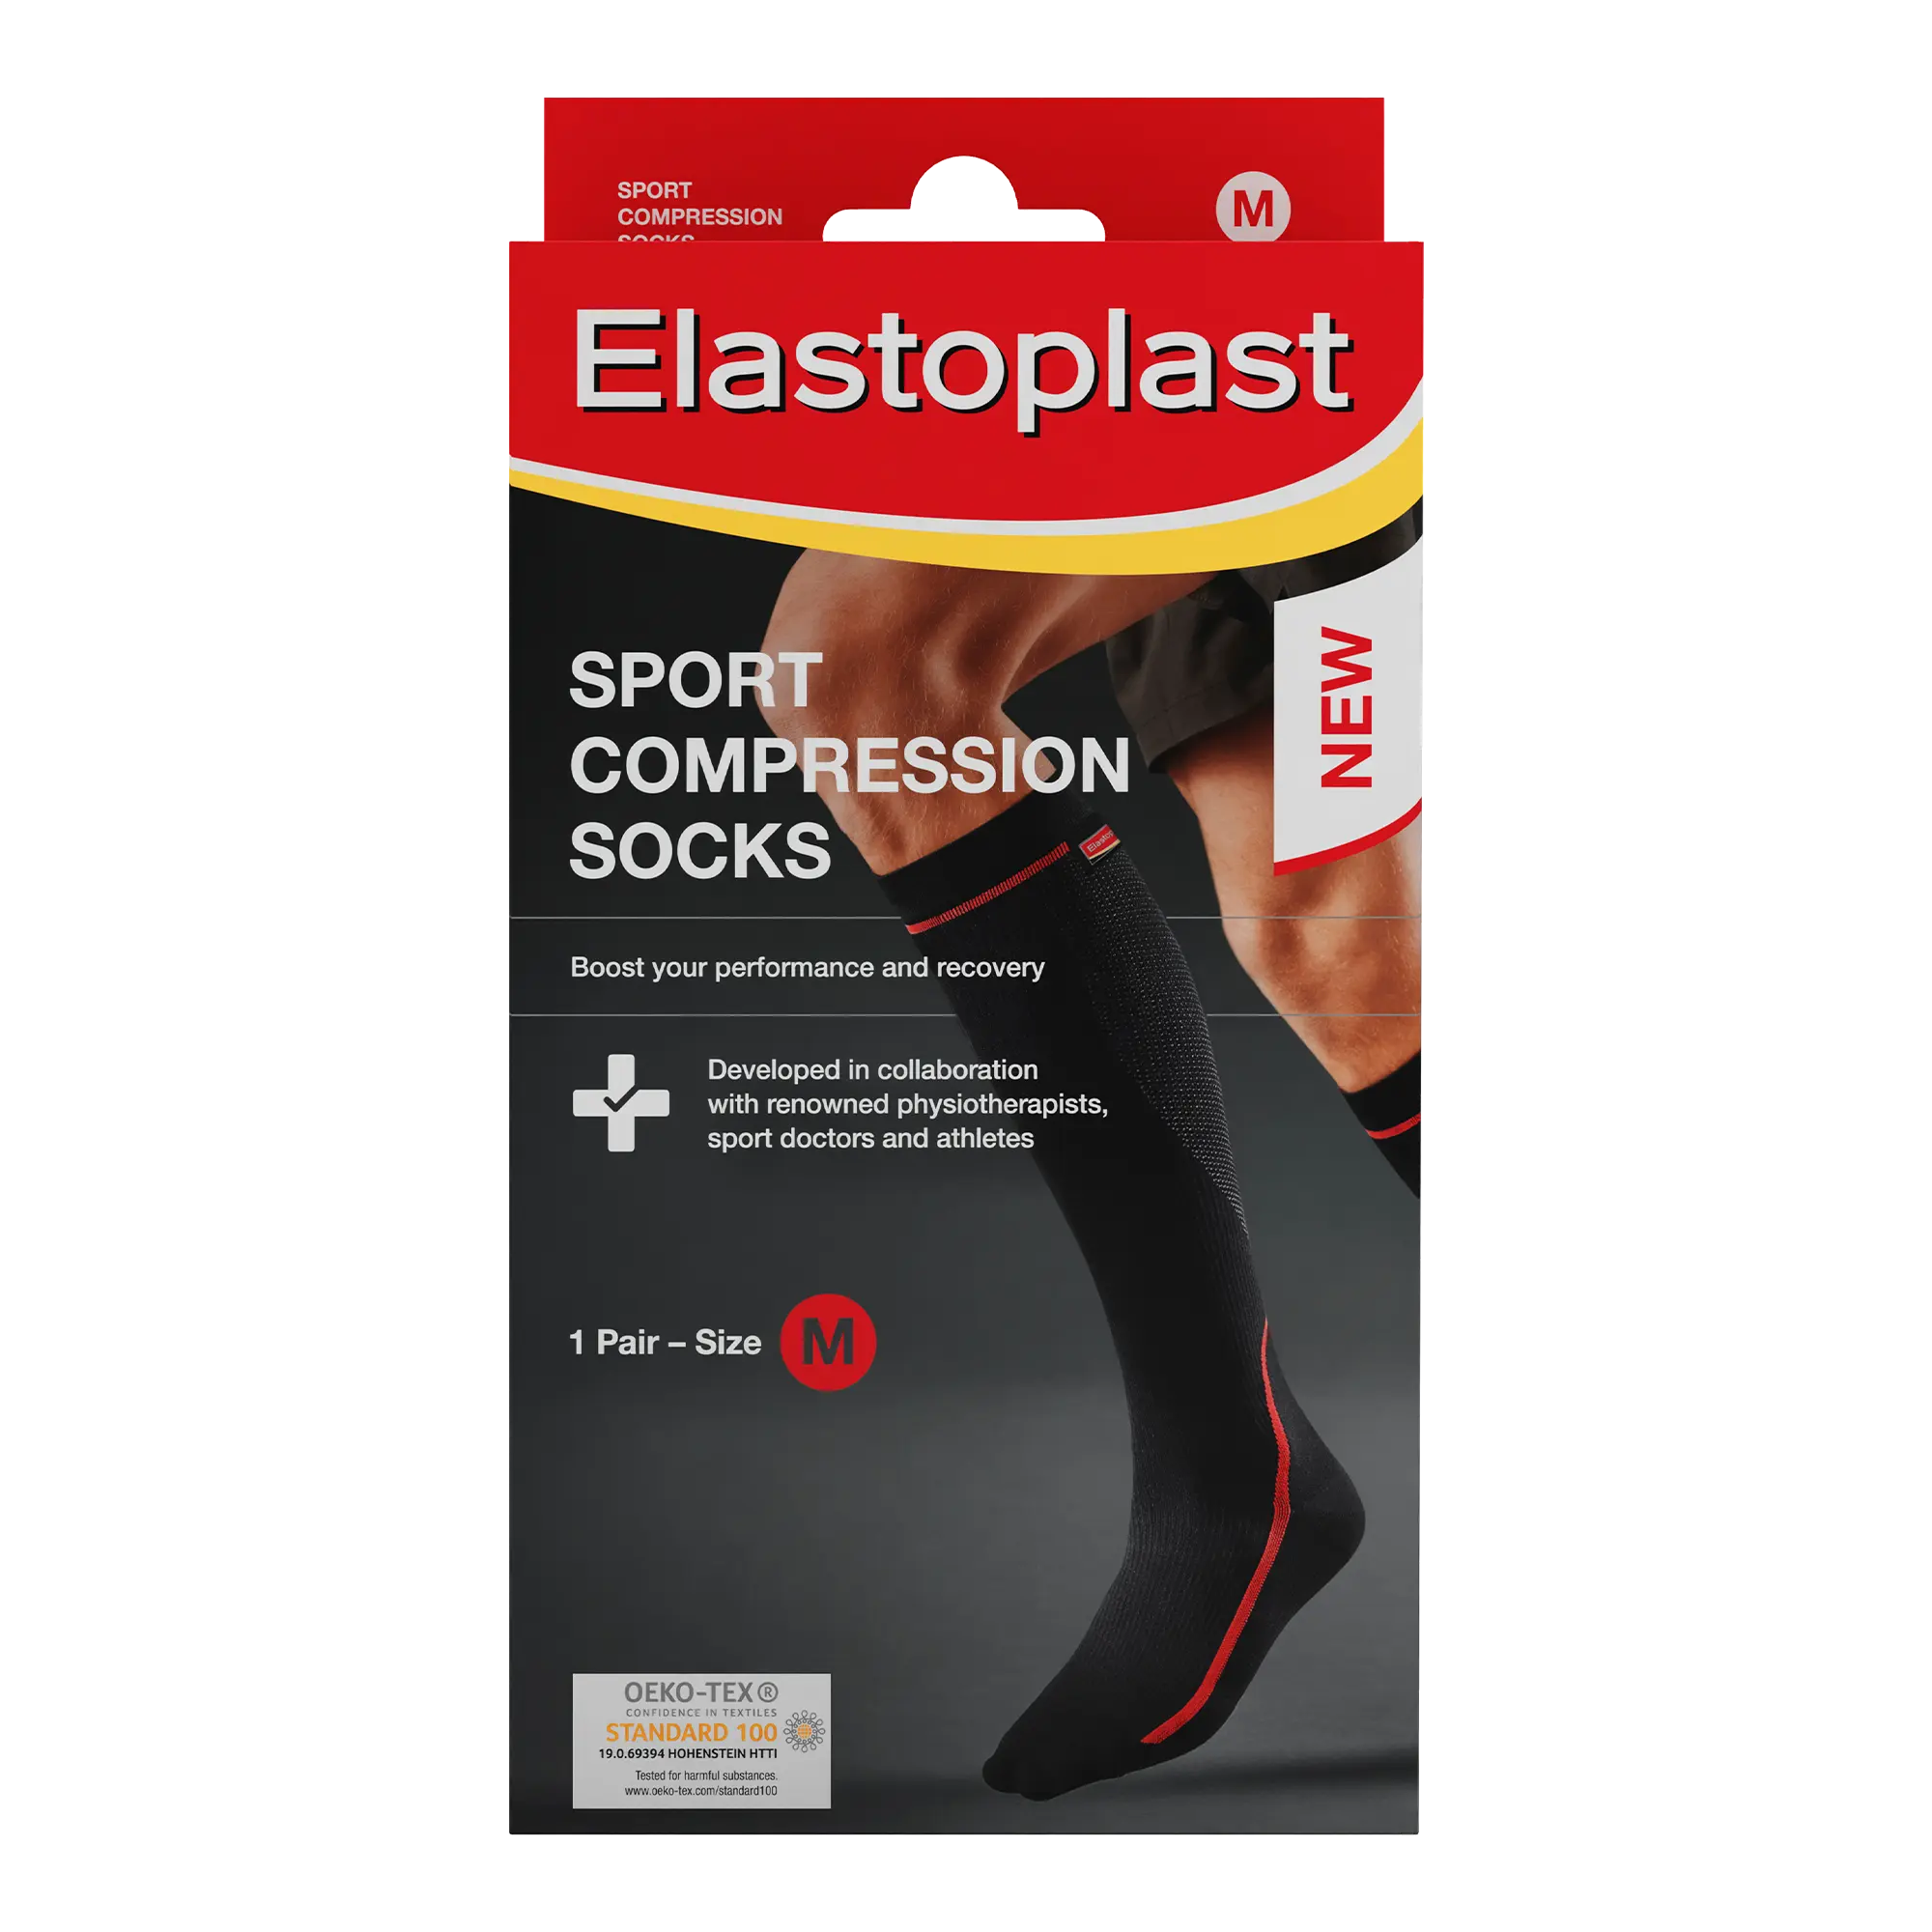 Compression Stockings,Compression Running Sleeve Stretch Stretch Socks  Stockings Elevated Design 